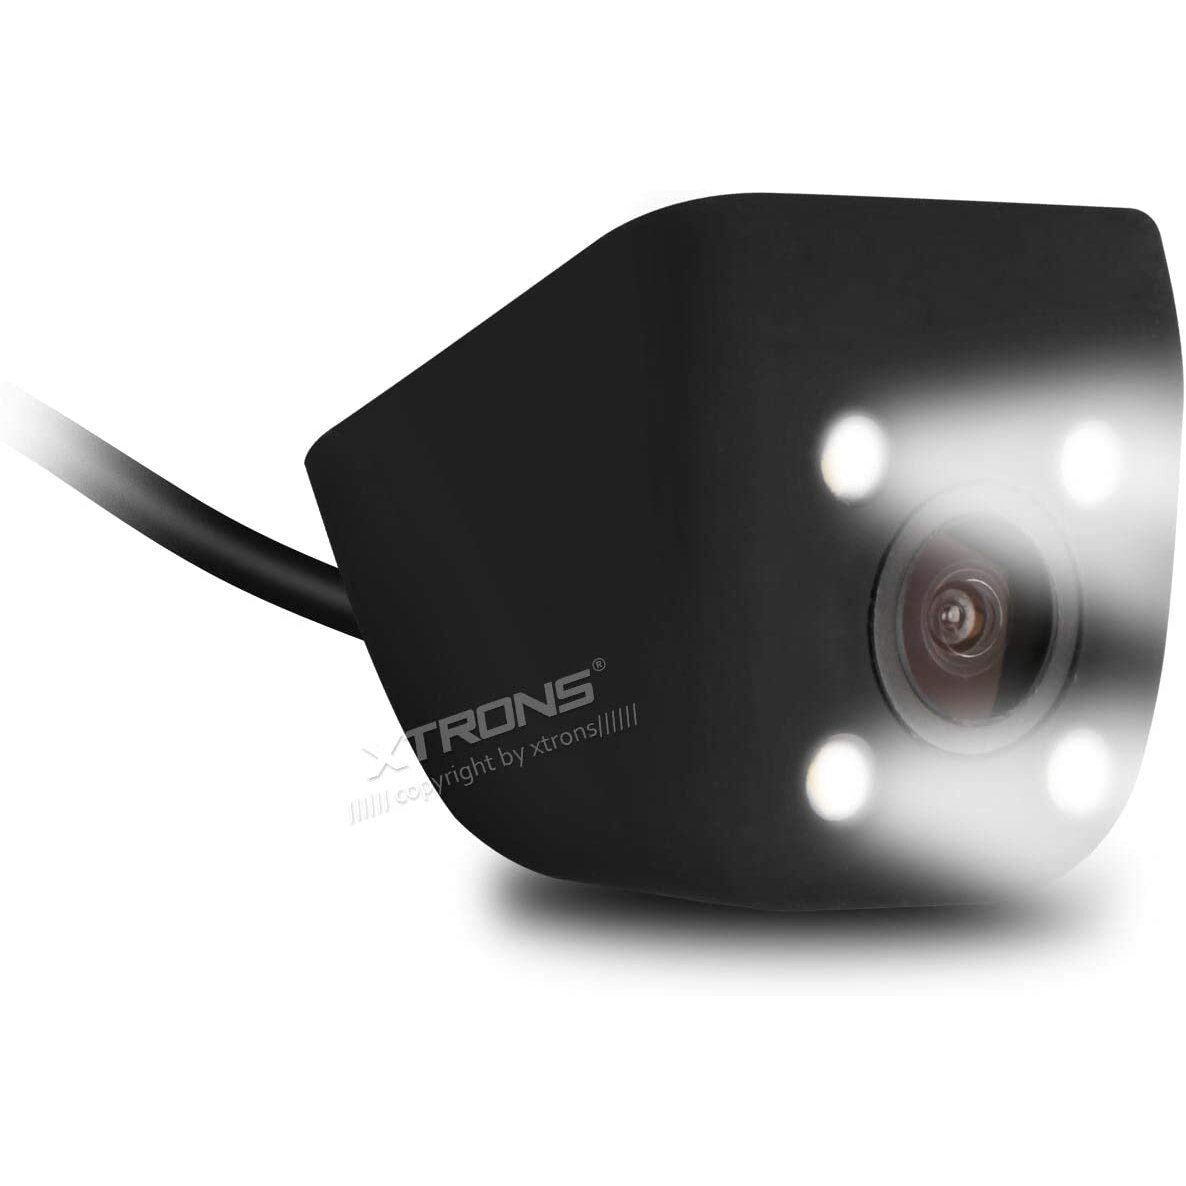 Xtrons 170掳 Wide Angle HD Rear View Reversing Camera Waterproof with CMOS Imaging Sensor and Four-eye Strong LED Light鈥